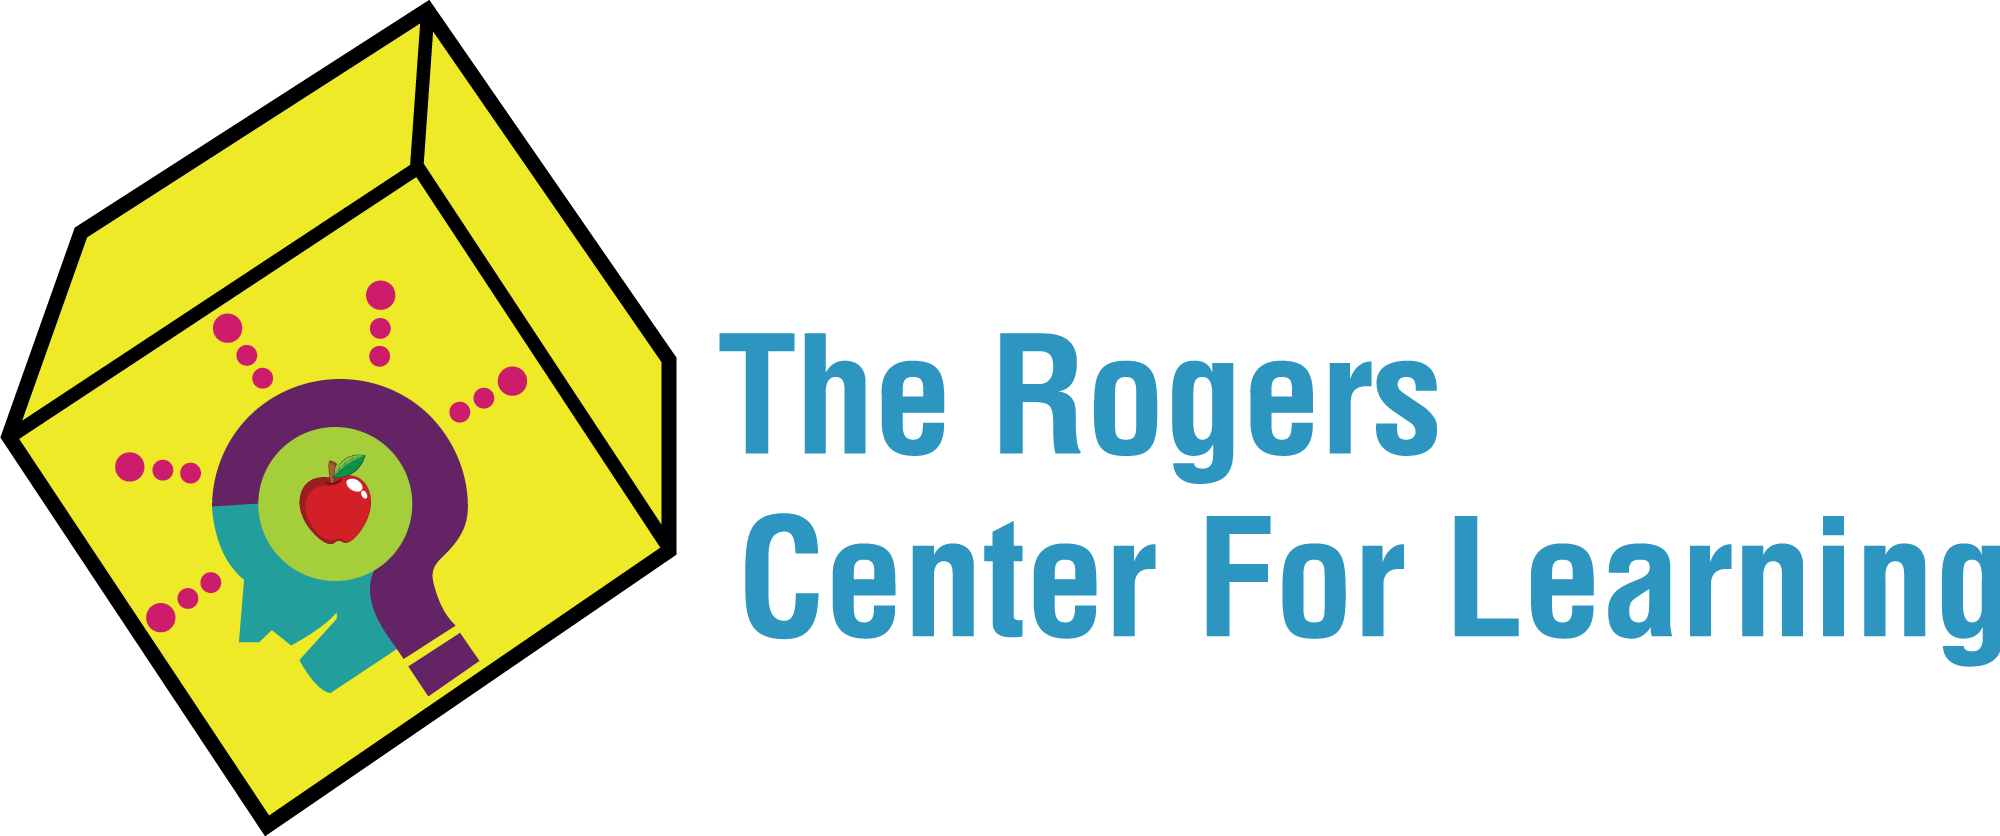 app4-learning-the-rogers-center-for-learning-logo